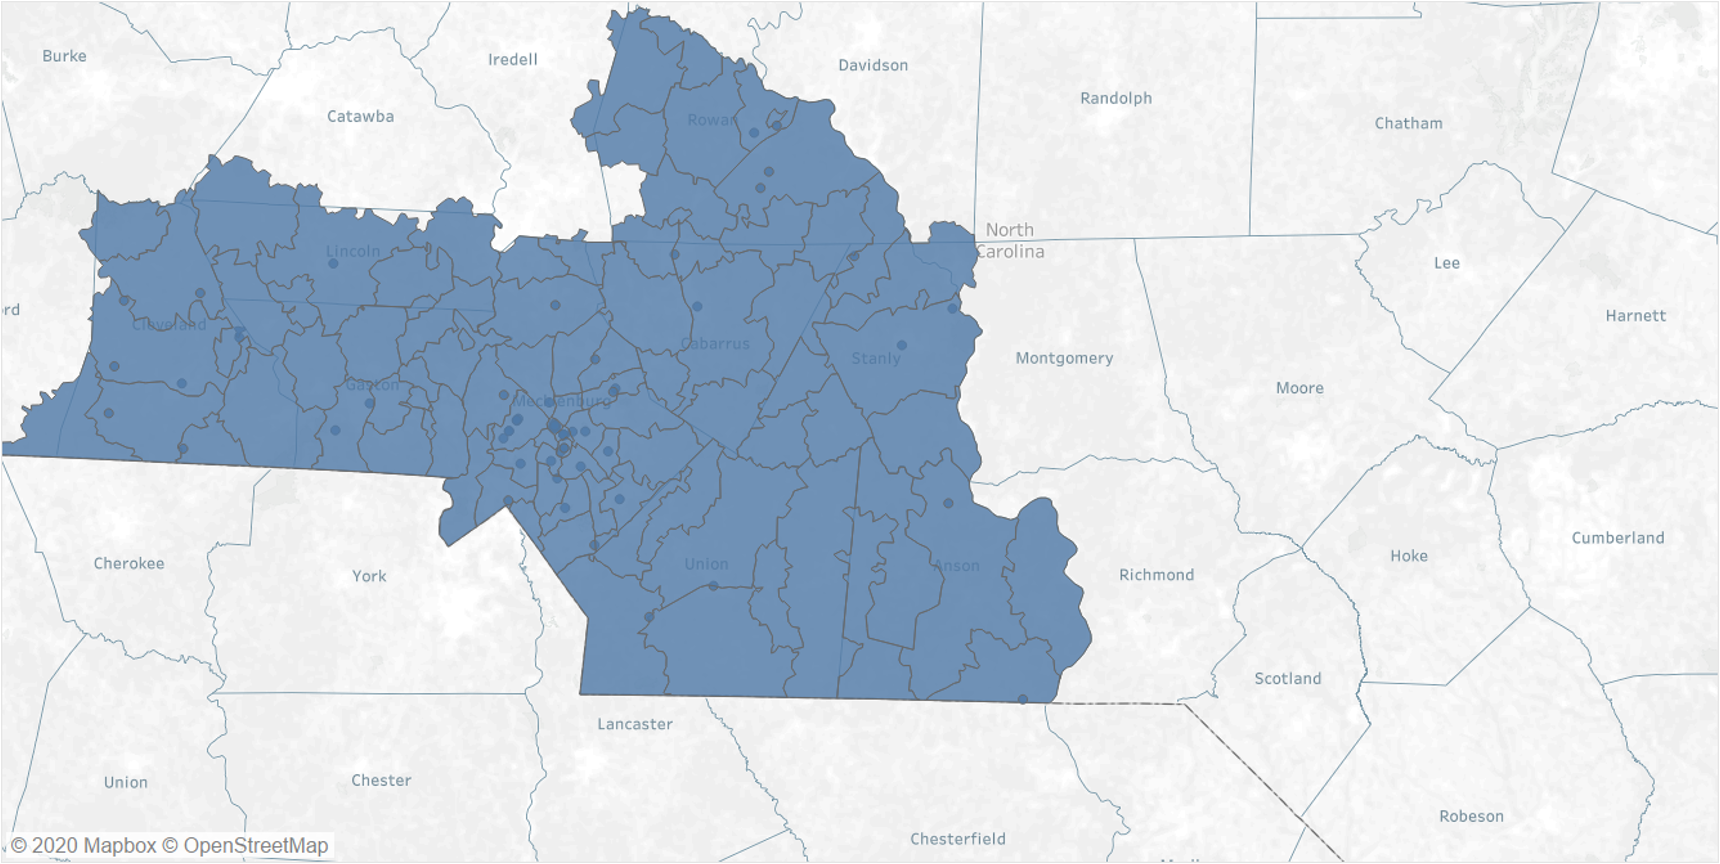 Charlotte area service map for the Blue High Performance Network